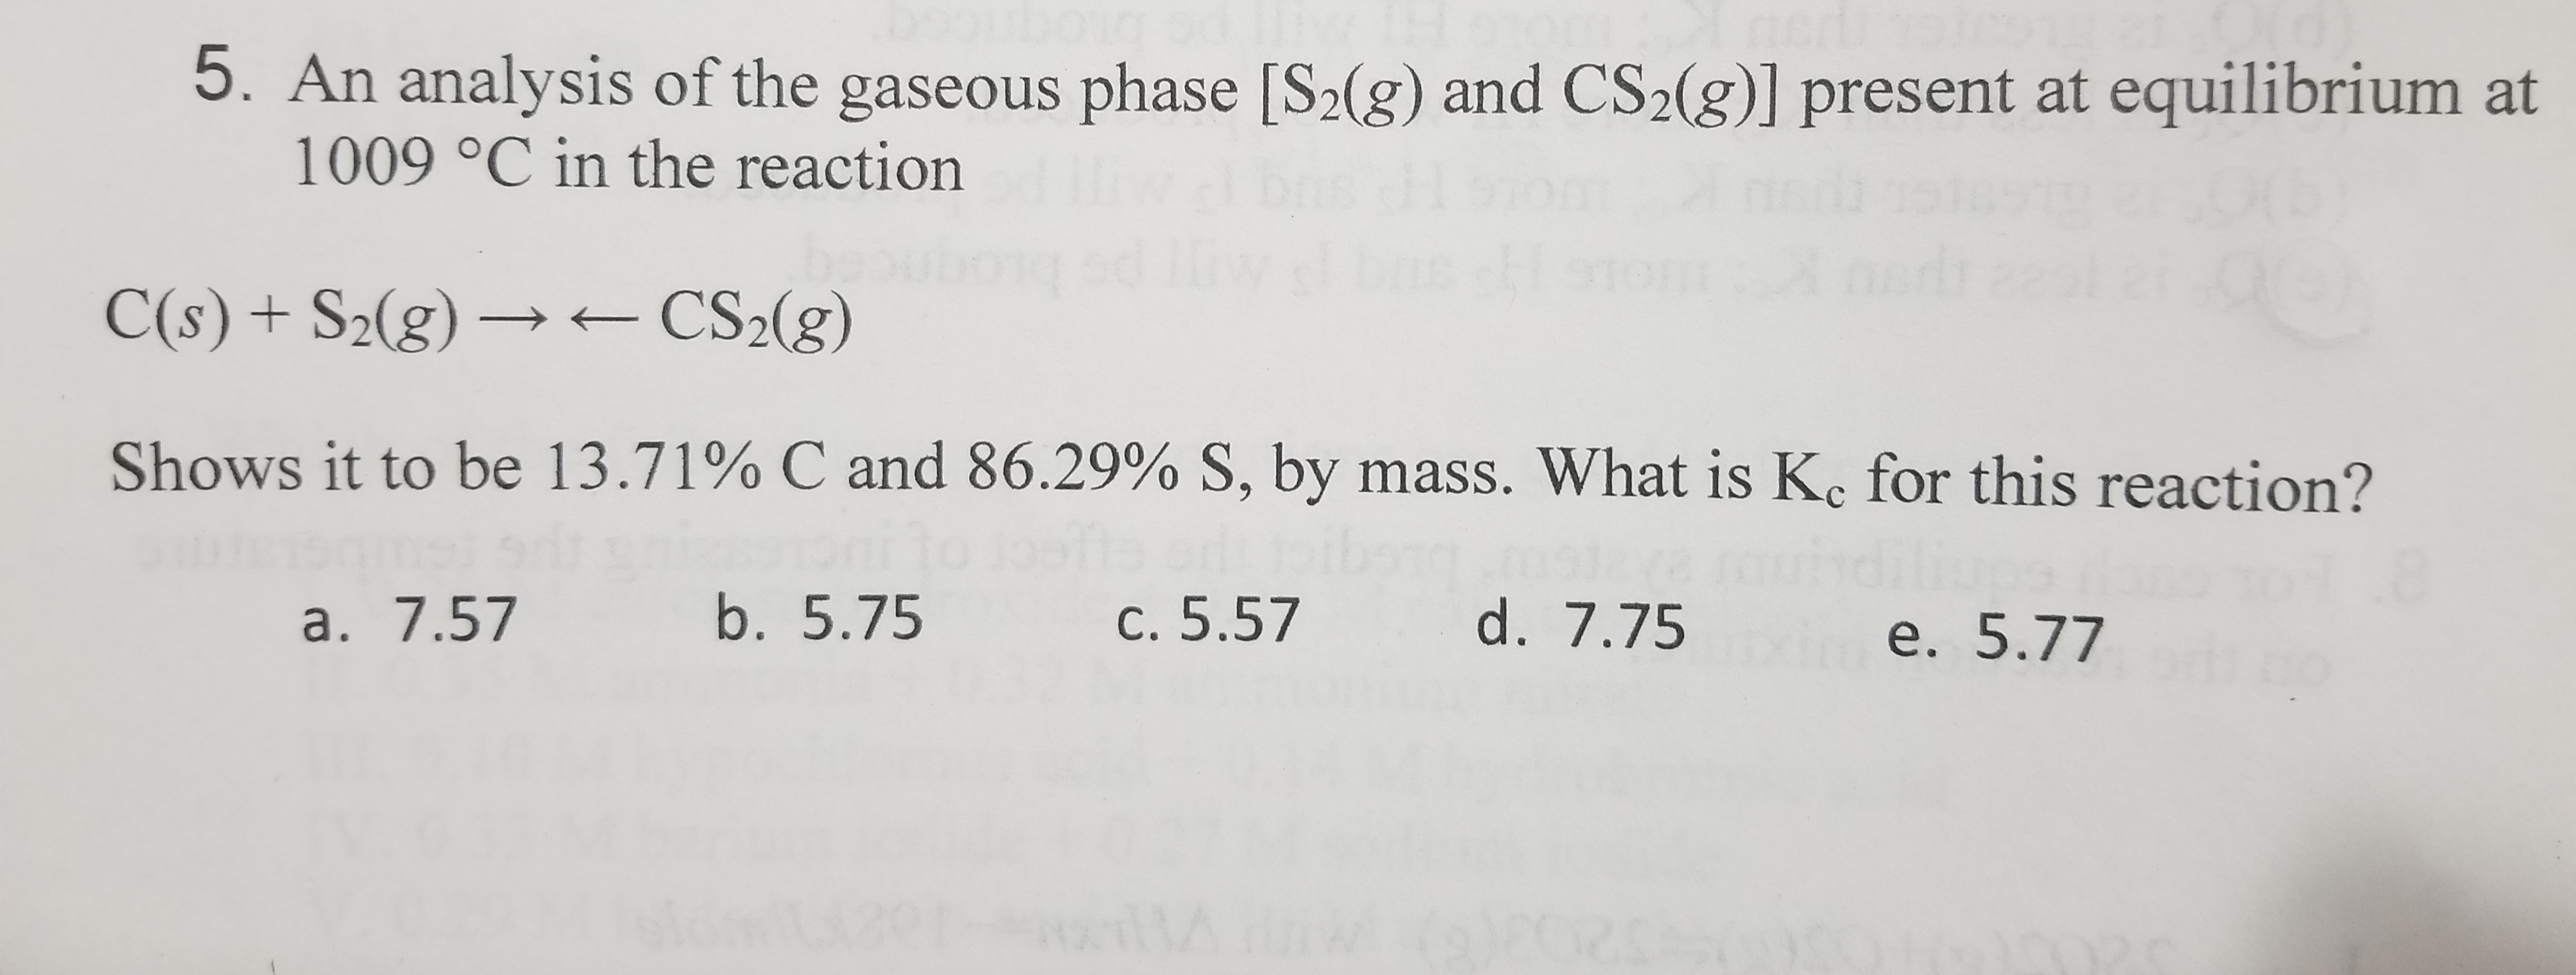 5. An analysis of the gaseous phase [S2(g) and CS2(g)] present at equilibrium at
1009 °C in the reaction
C(s) + S2(g) → – CS2(g)
Shows it to be 13.71% C and 86.29% S, by mass. What is K. for this reaction?
a. 7.57
b. 5.75
c. 5.57
d. 7.75
e. 5.77
